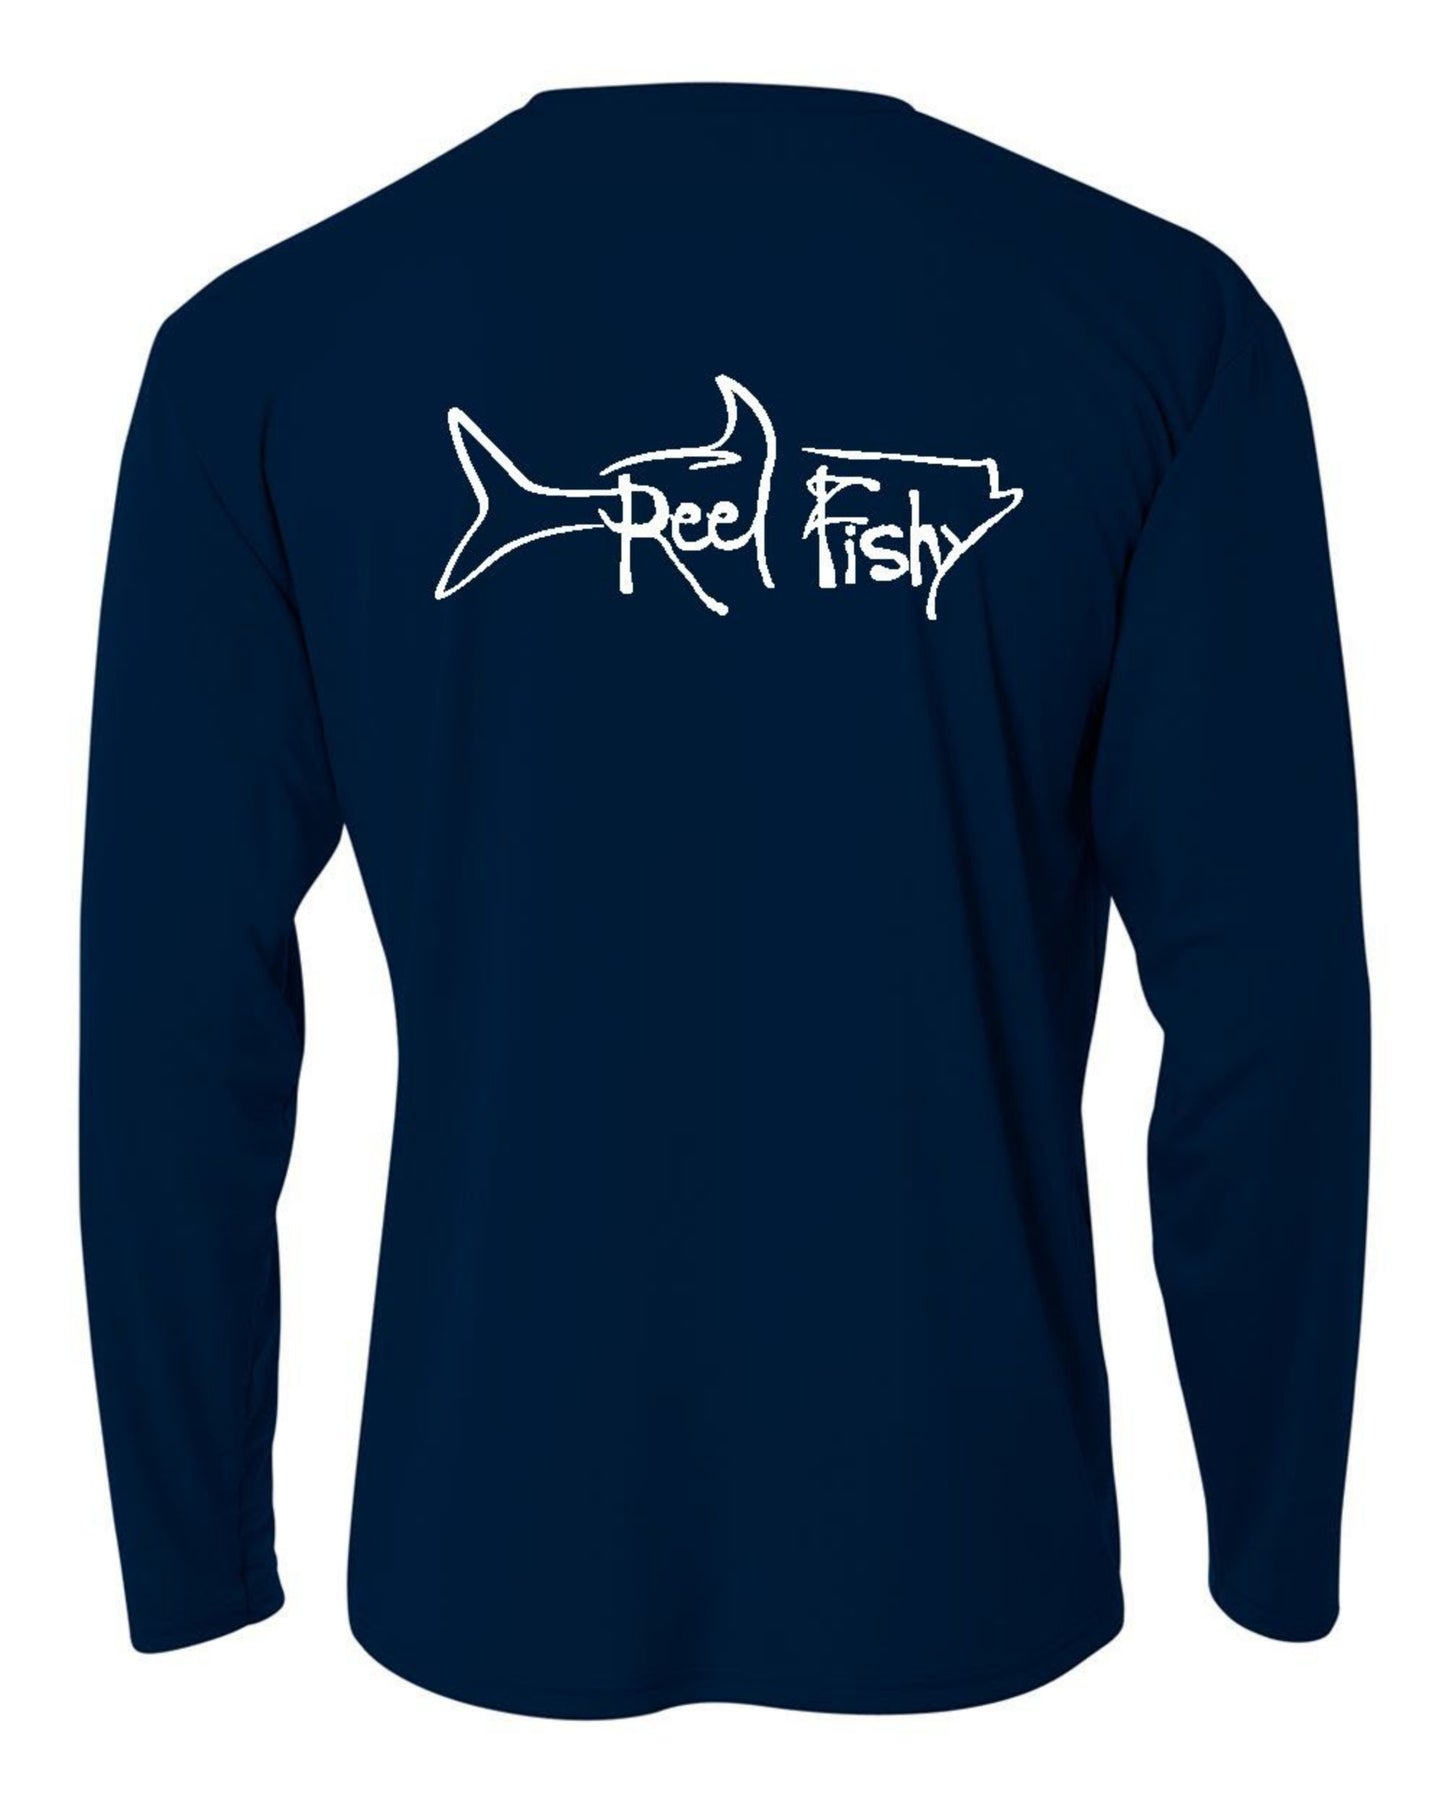 Youth Performance Dry-Fit Tarpon Fishing Shirts with Sun Protection by Reel Fishy Apparel - Long Sleeve Navy